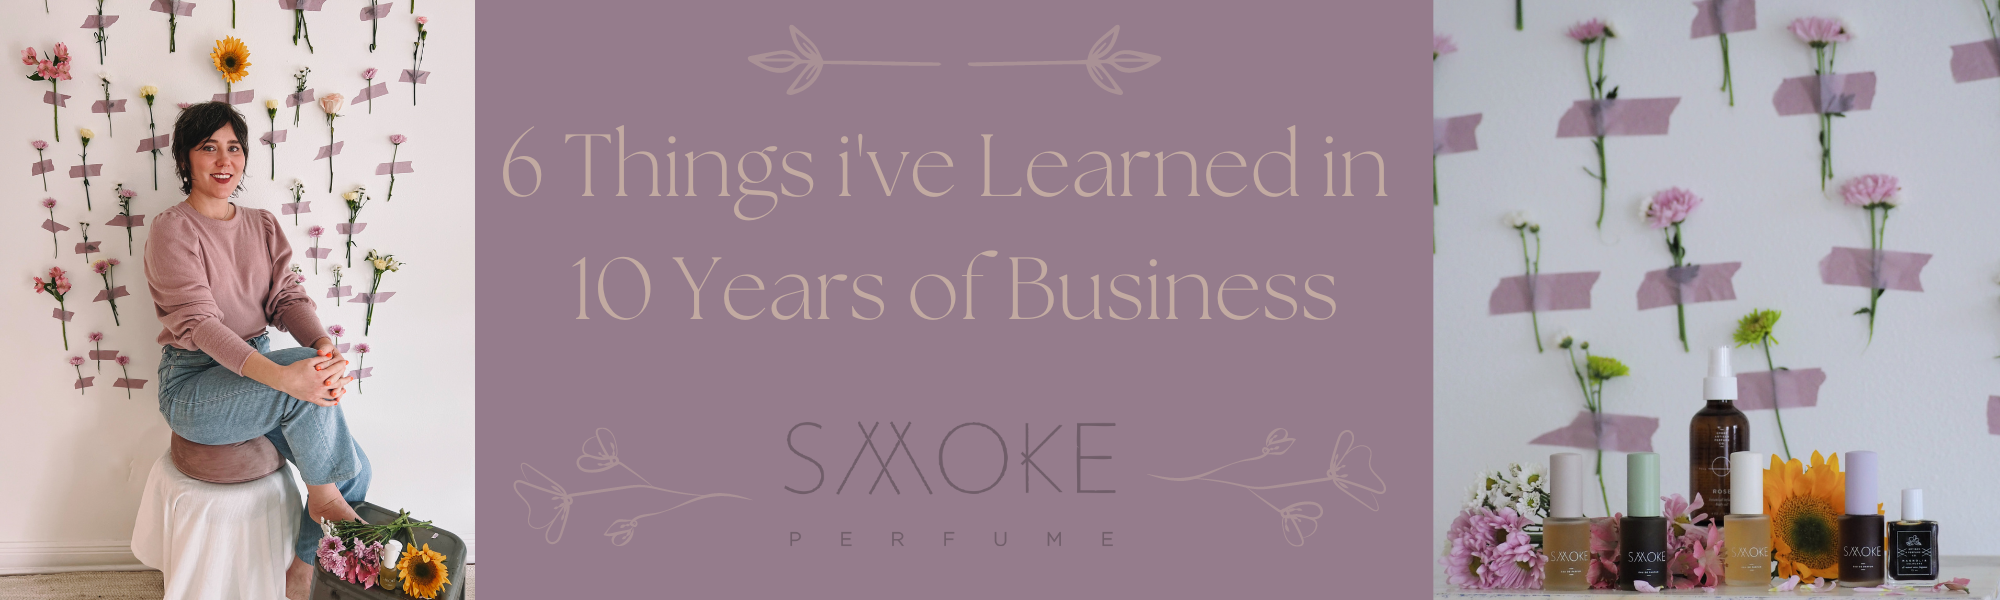 6 things I've learned in 10 years of business